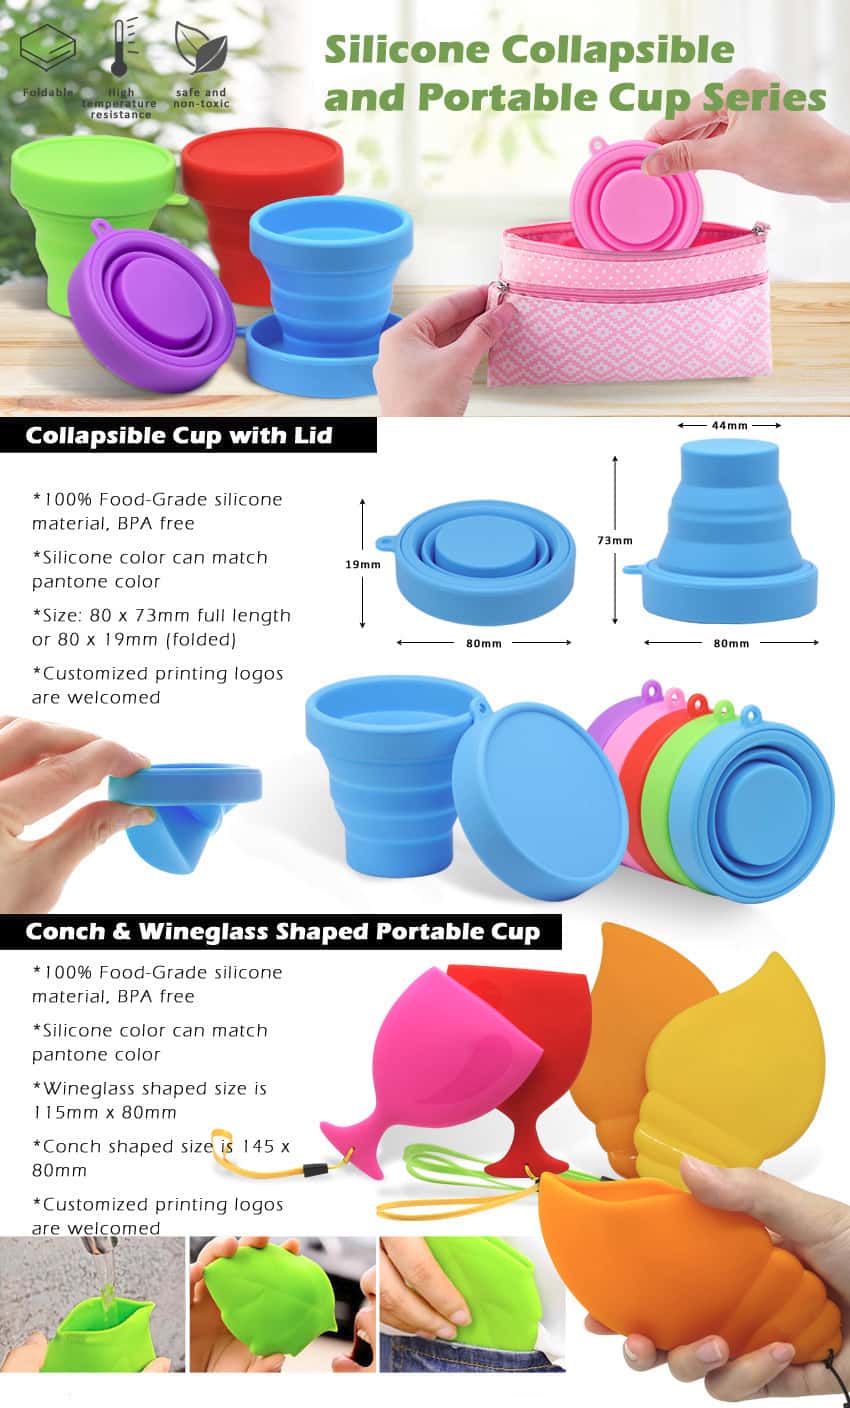 Silicone Collapsible